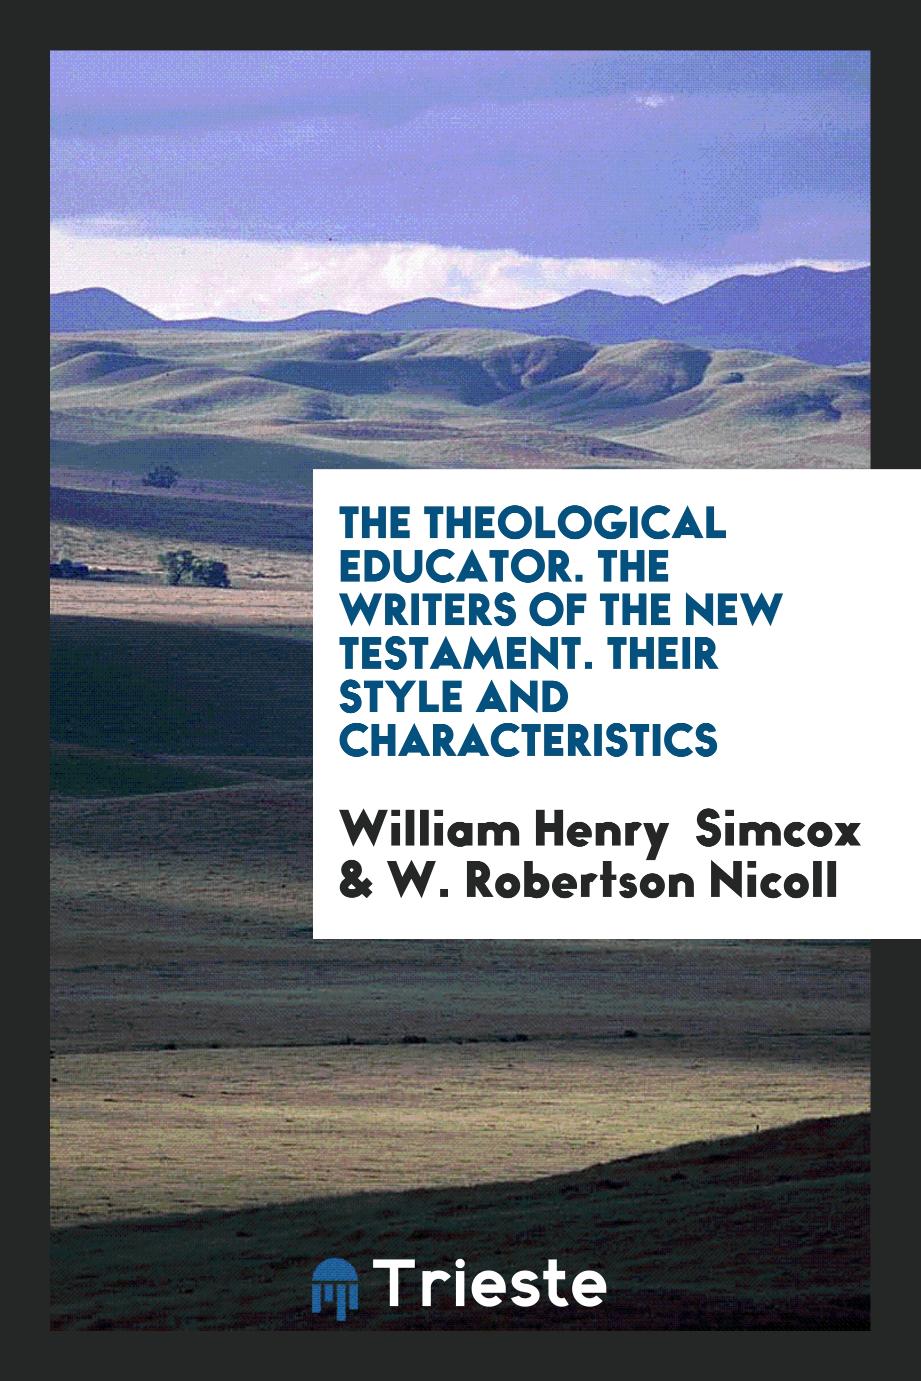 The Theological Educator. The Writers of the New Testament. Their Style and Characteristics